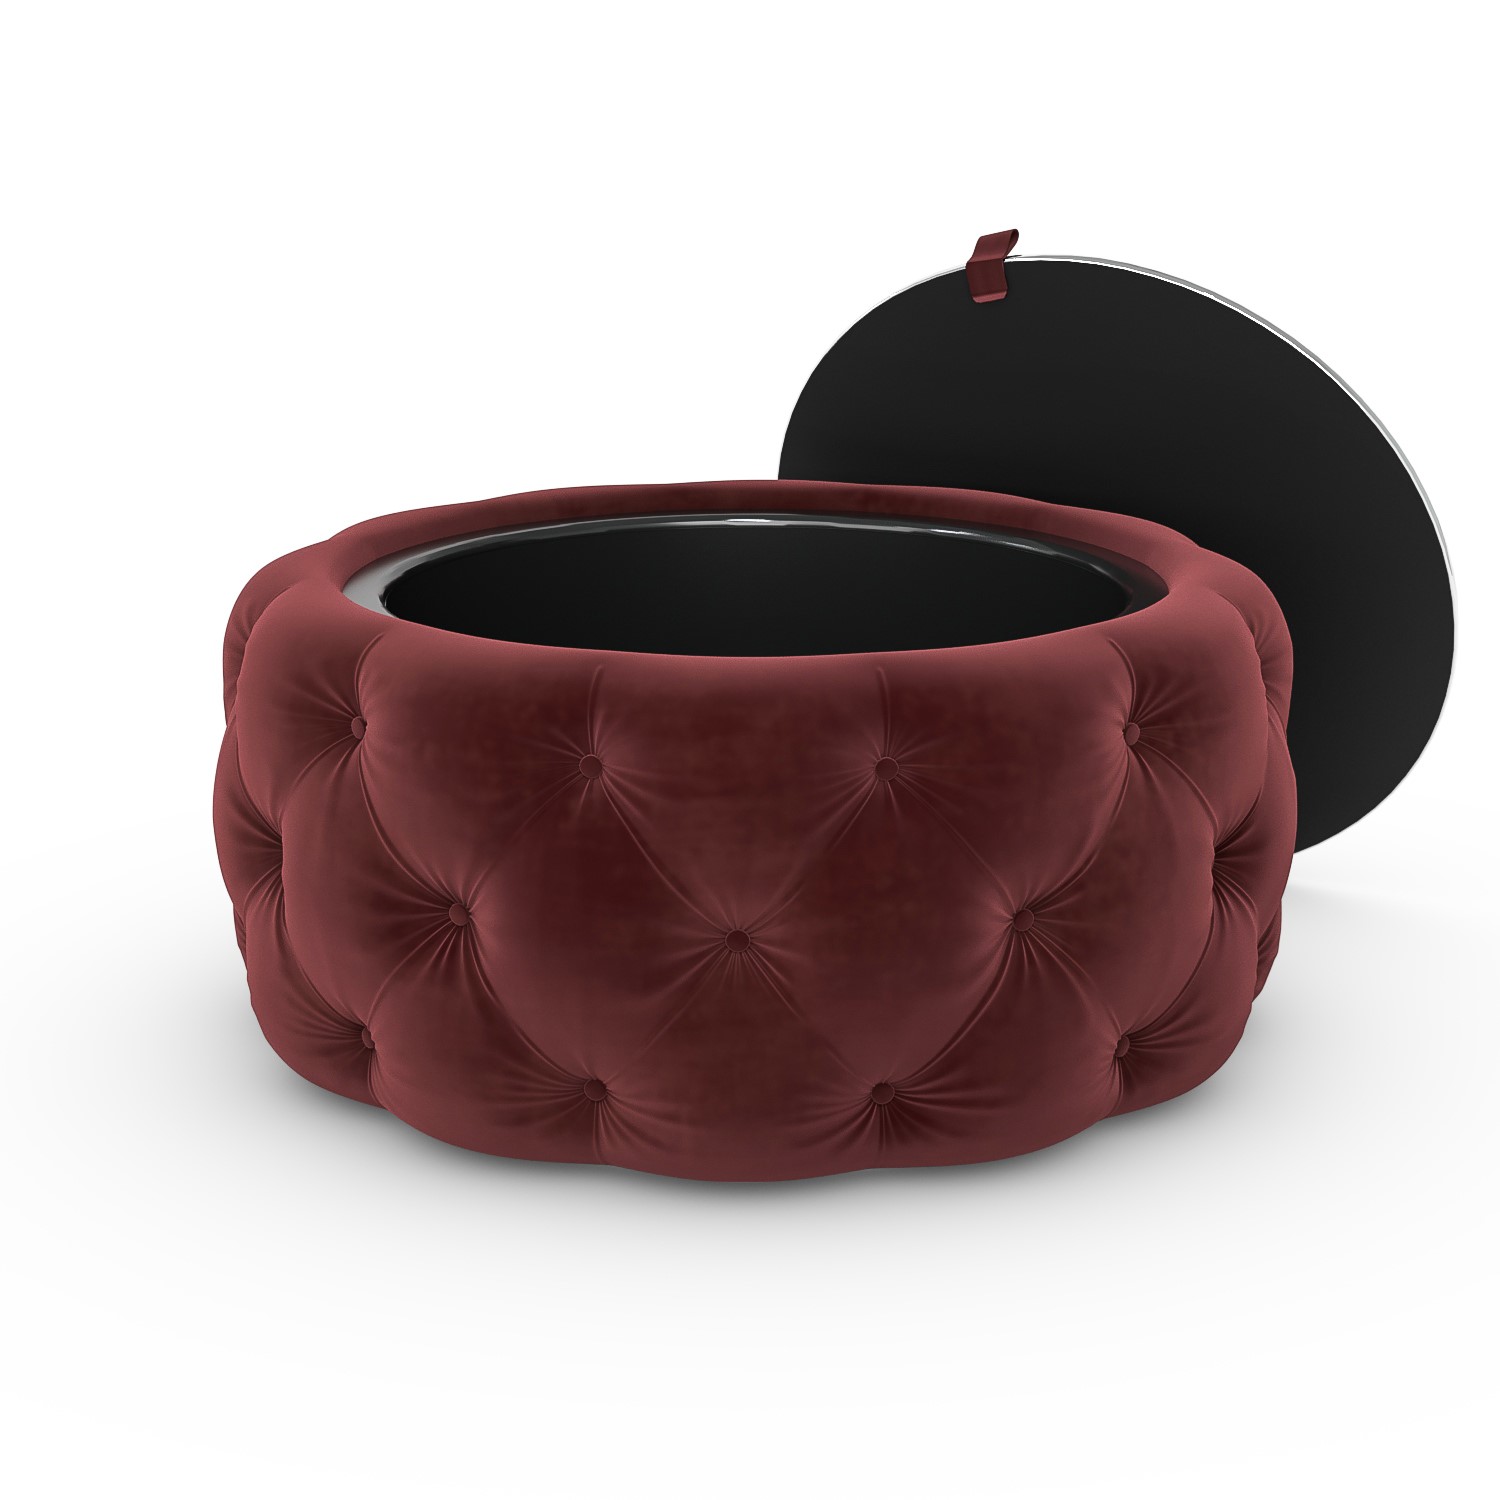 Read more about Large round red velvet ottoman pouffe clio